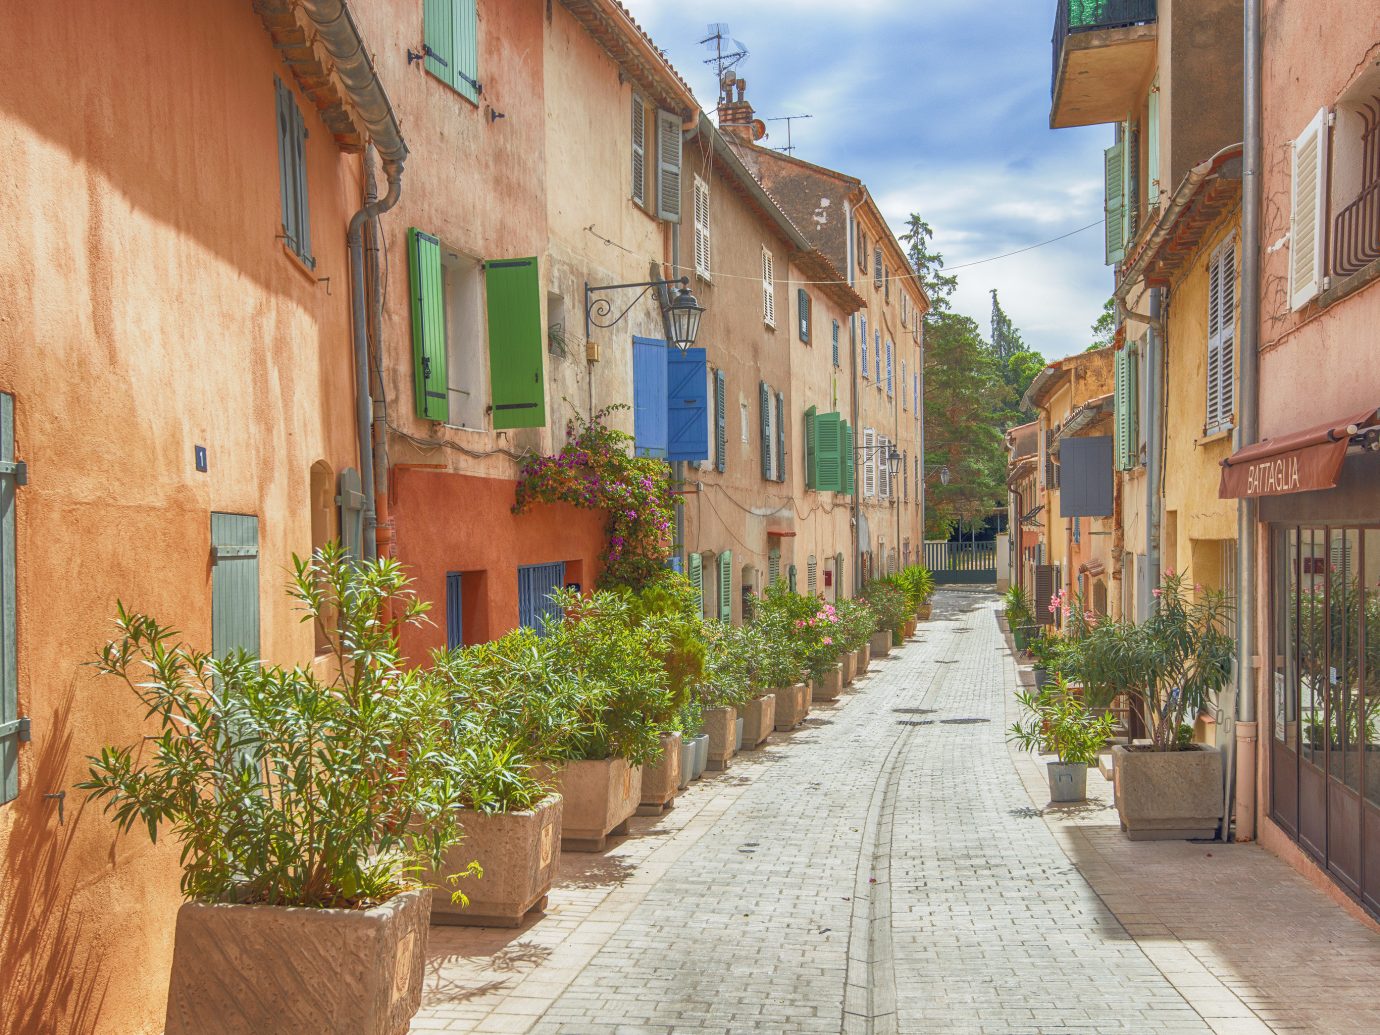 8 Best Places to Visit in the South of France | Jetsetter